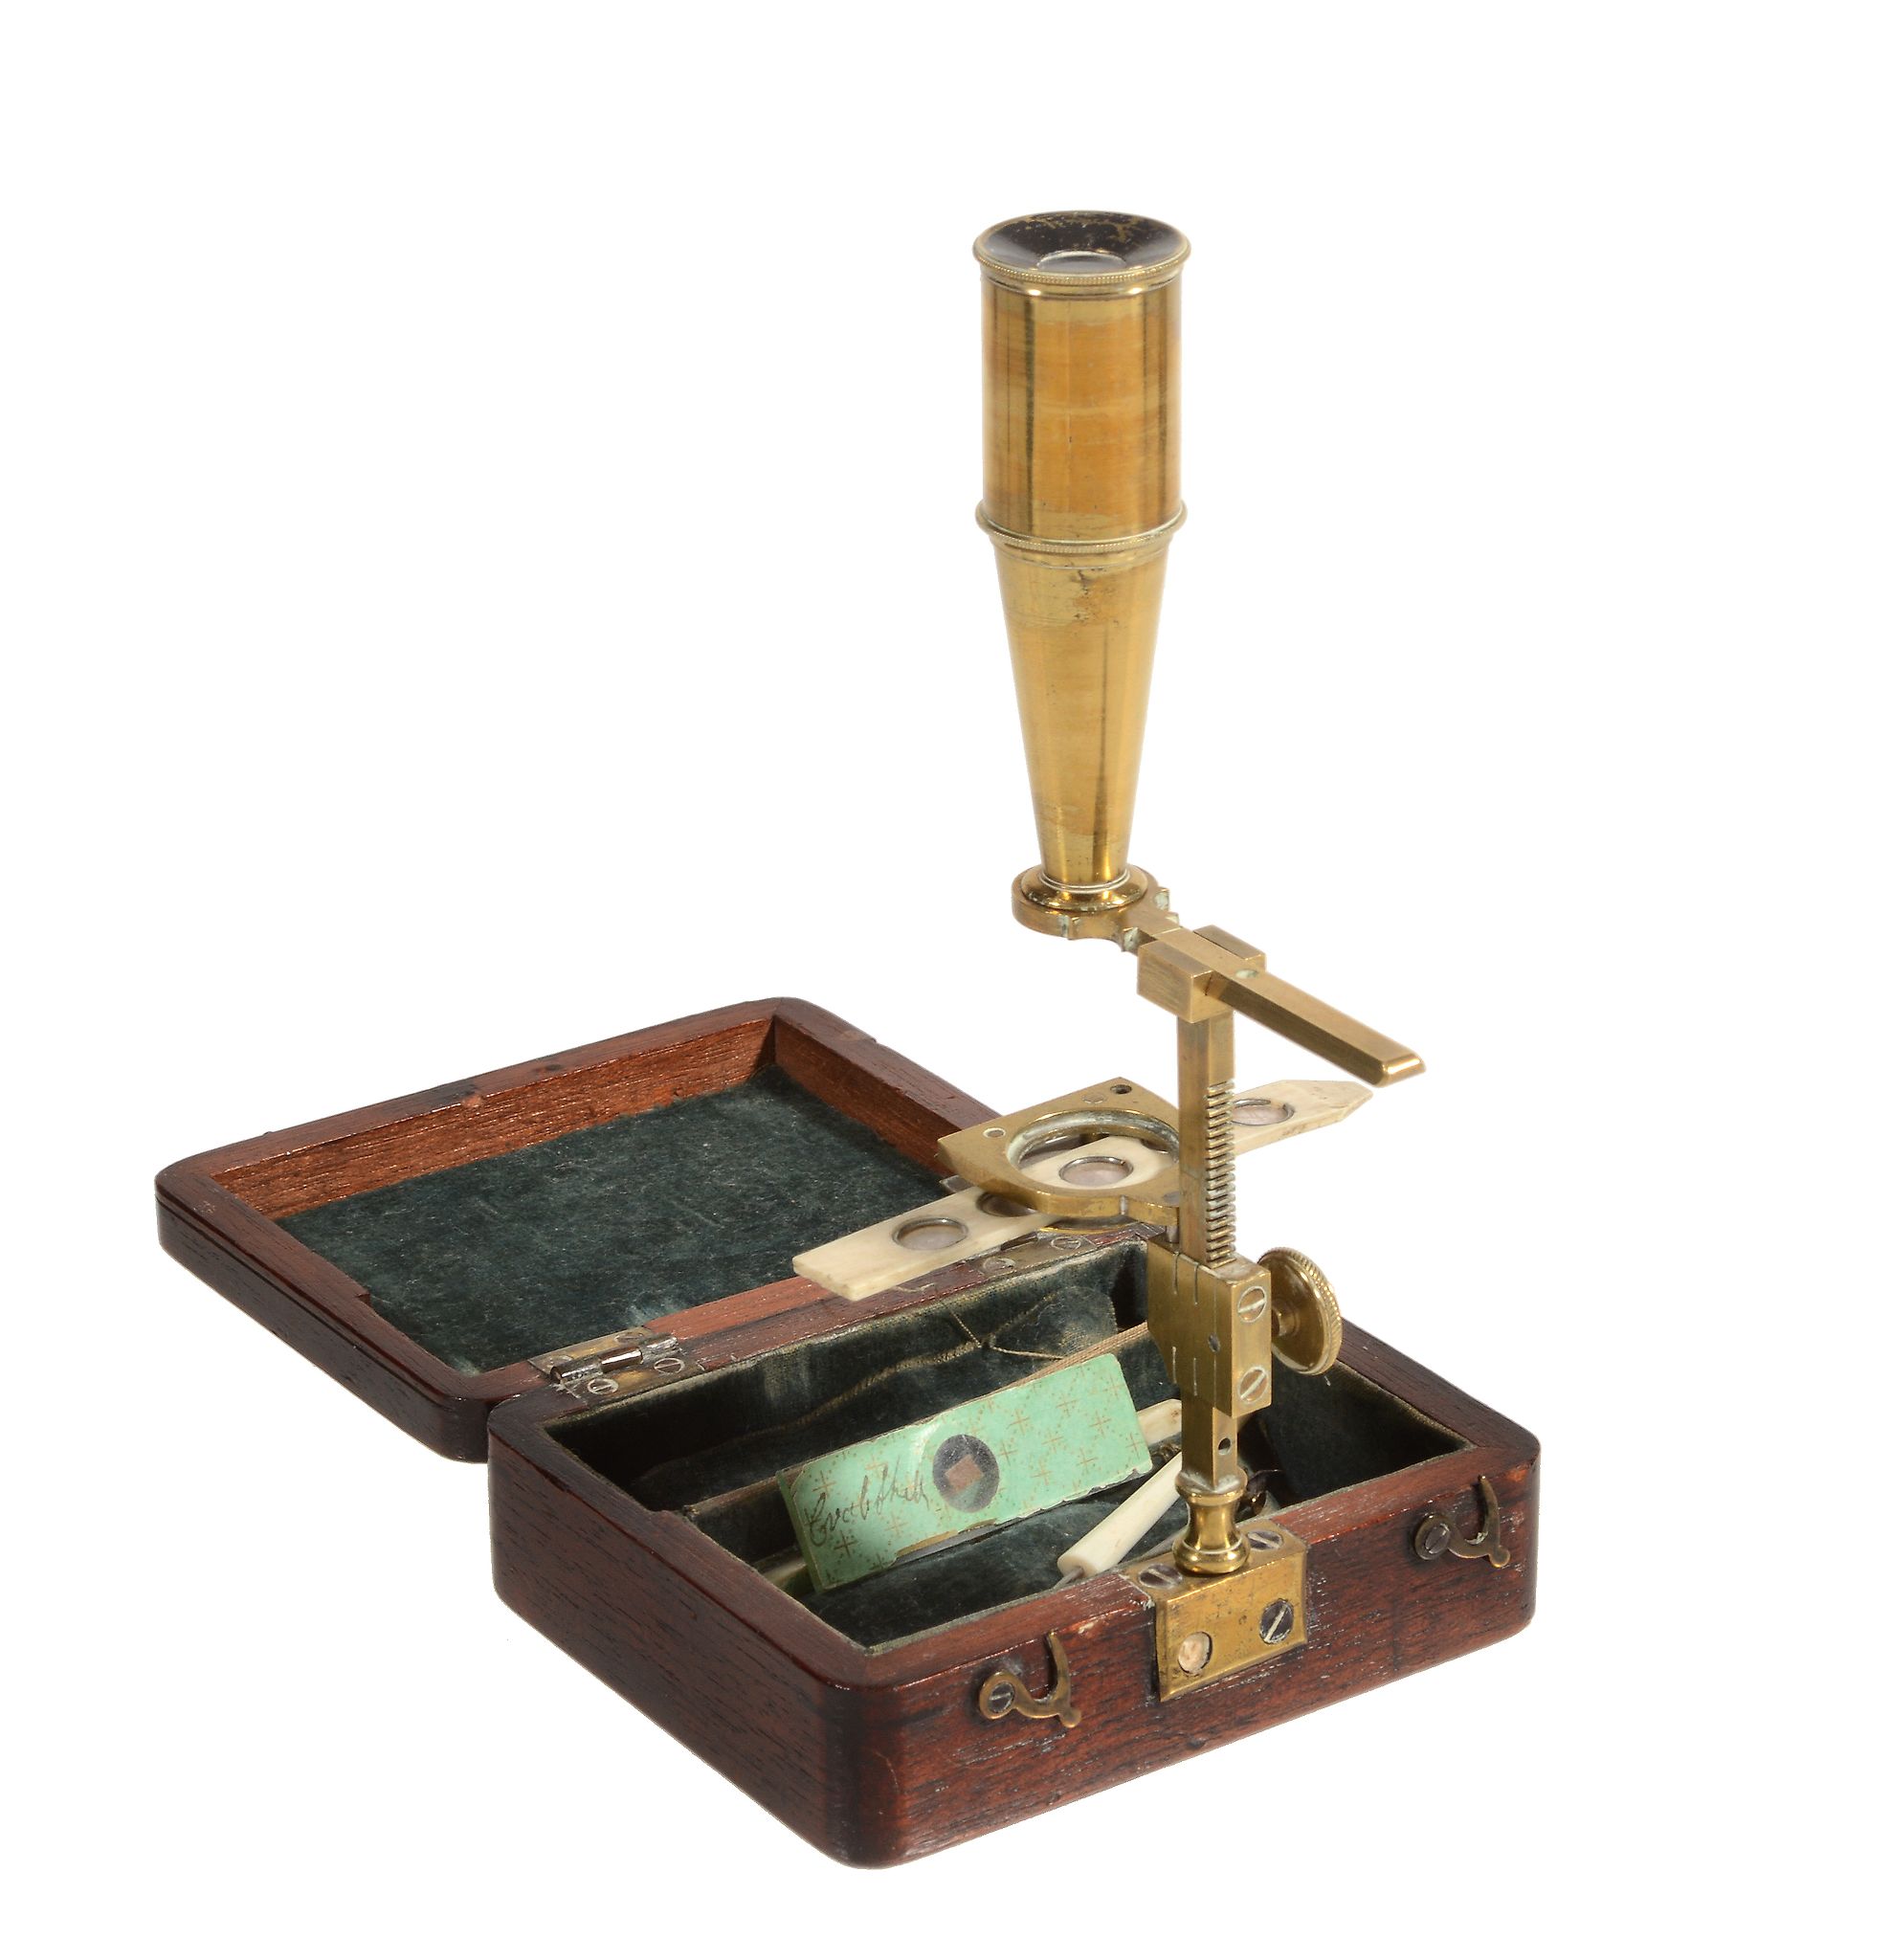 A Cary/Gould-type lacquered brass portable compound microscope Cary, London - Image 2 of 2